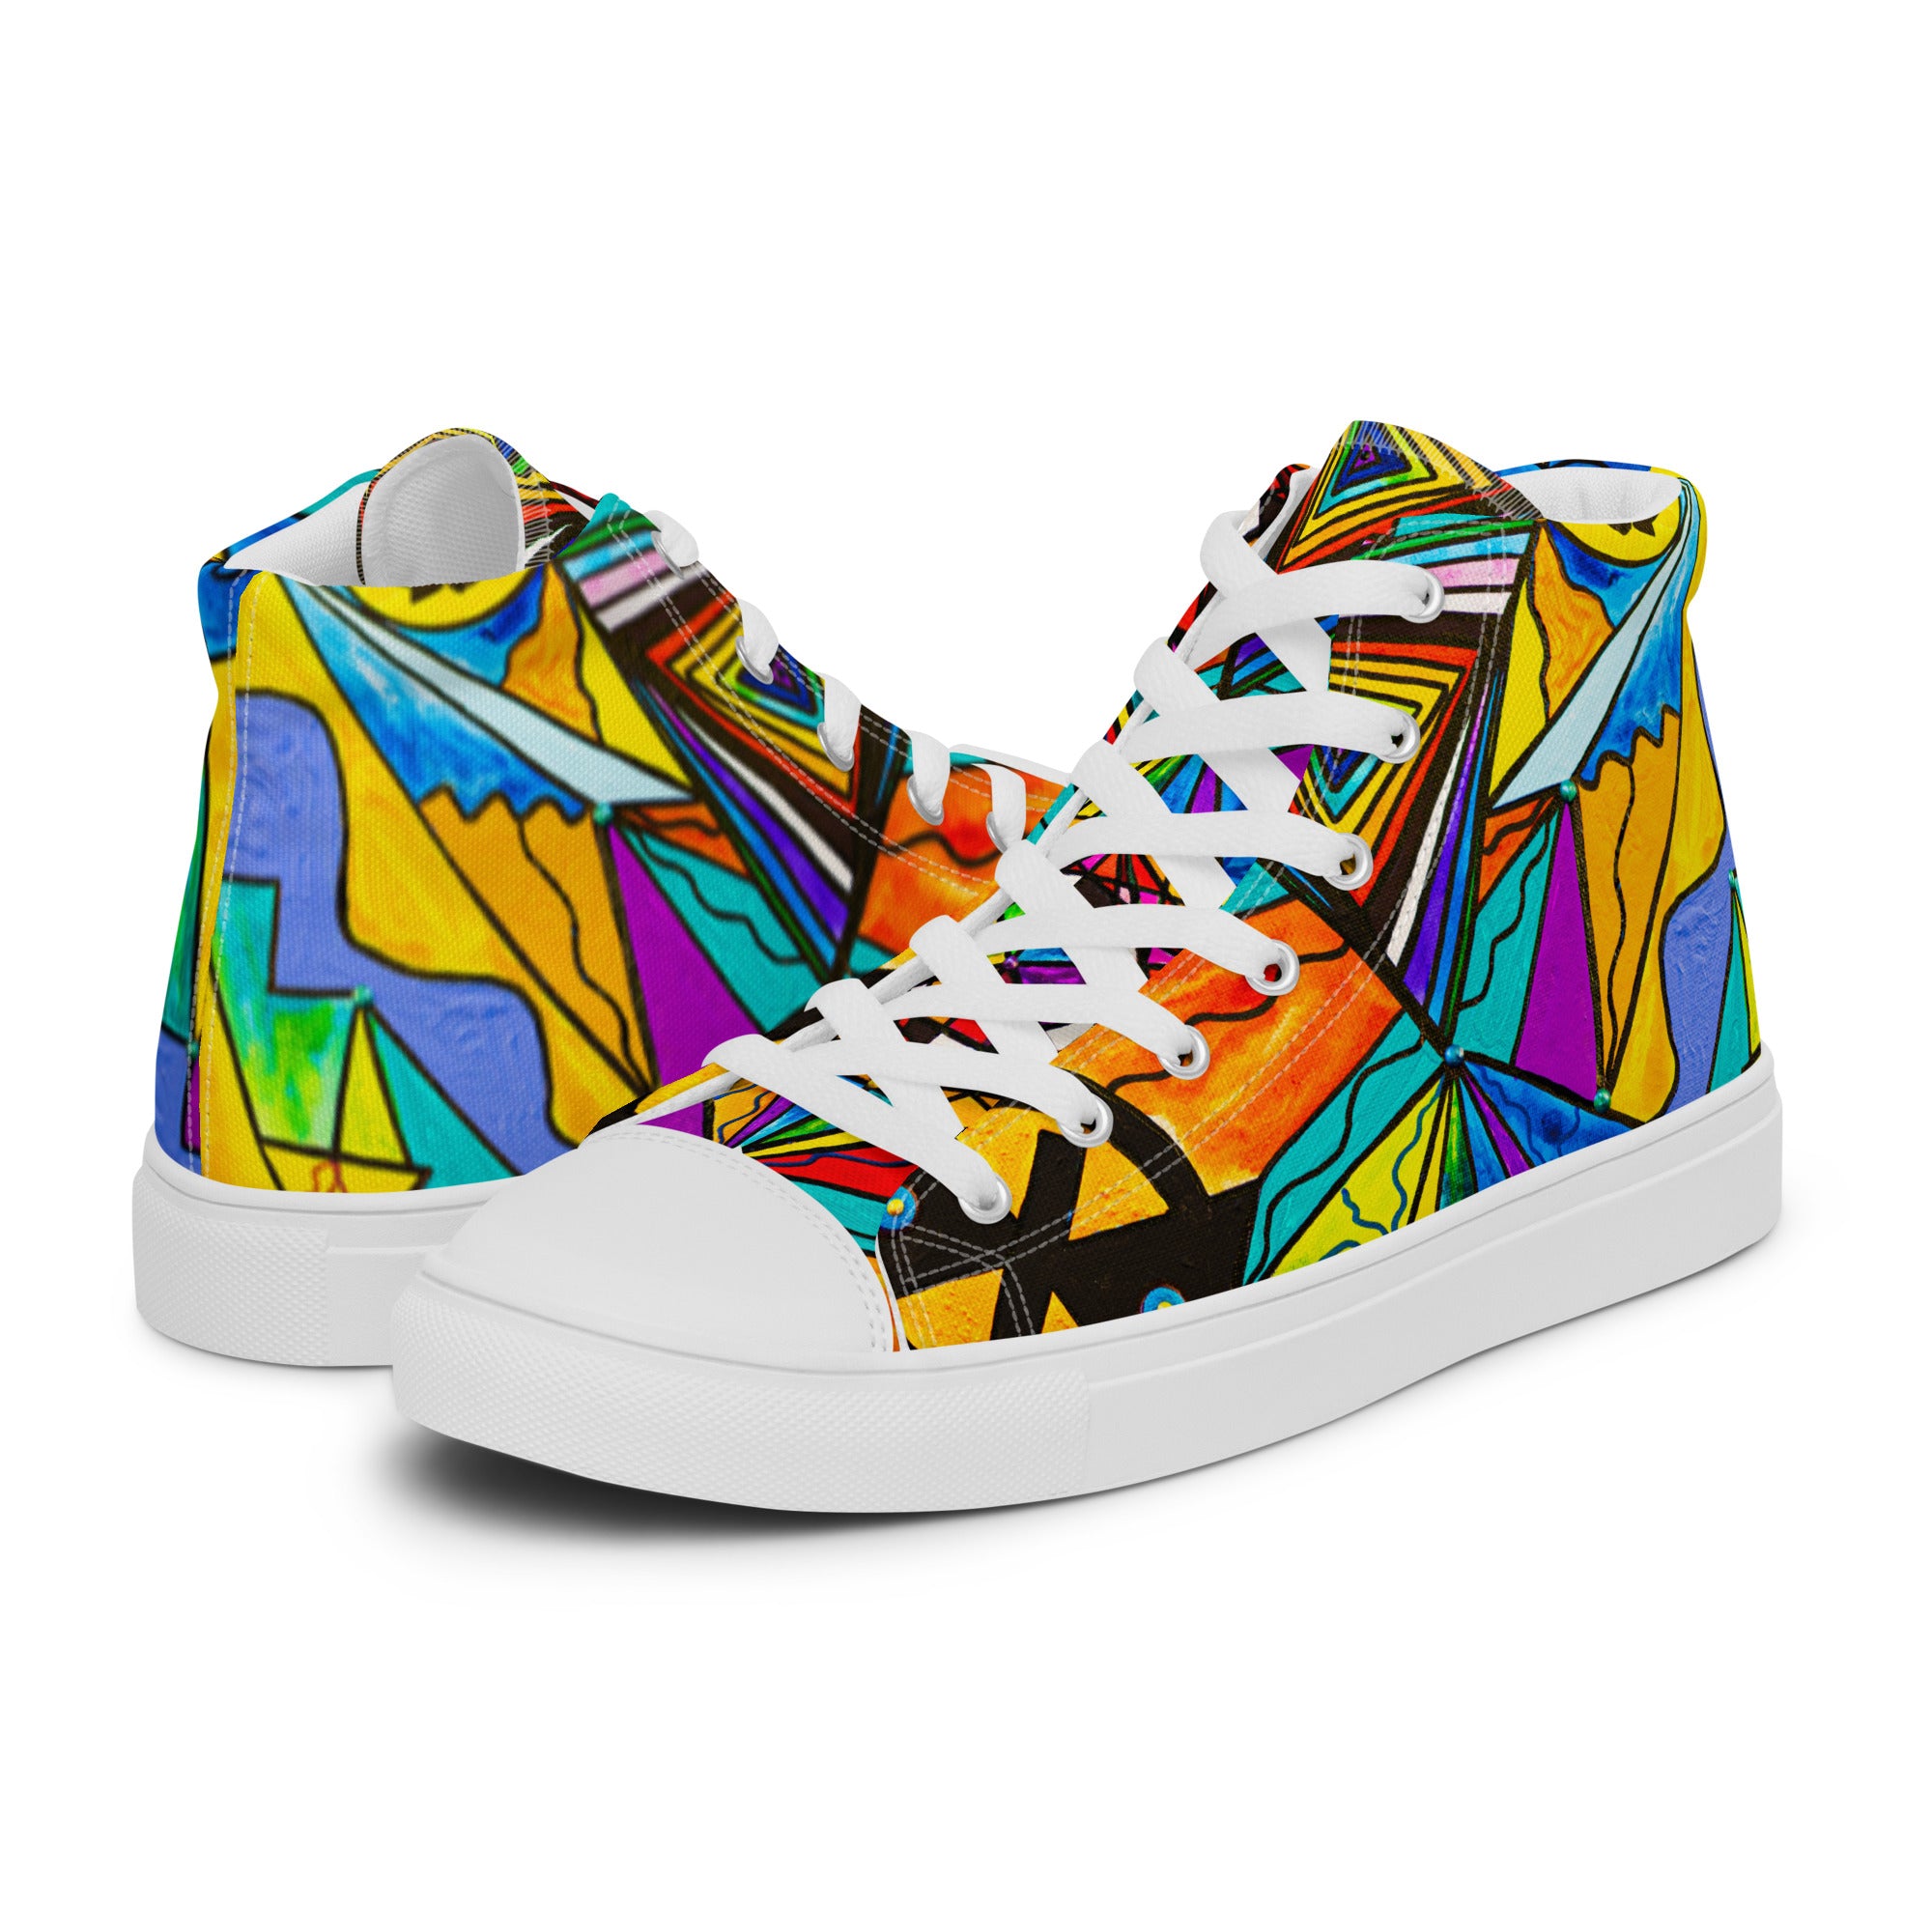 Adaptability Grid - Women’s high top canvas shoes